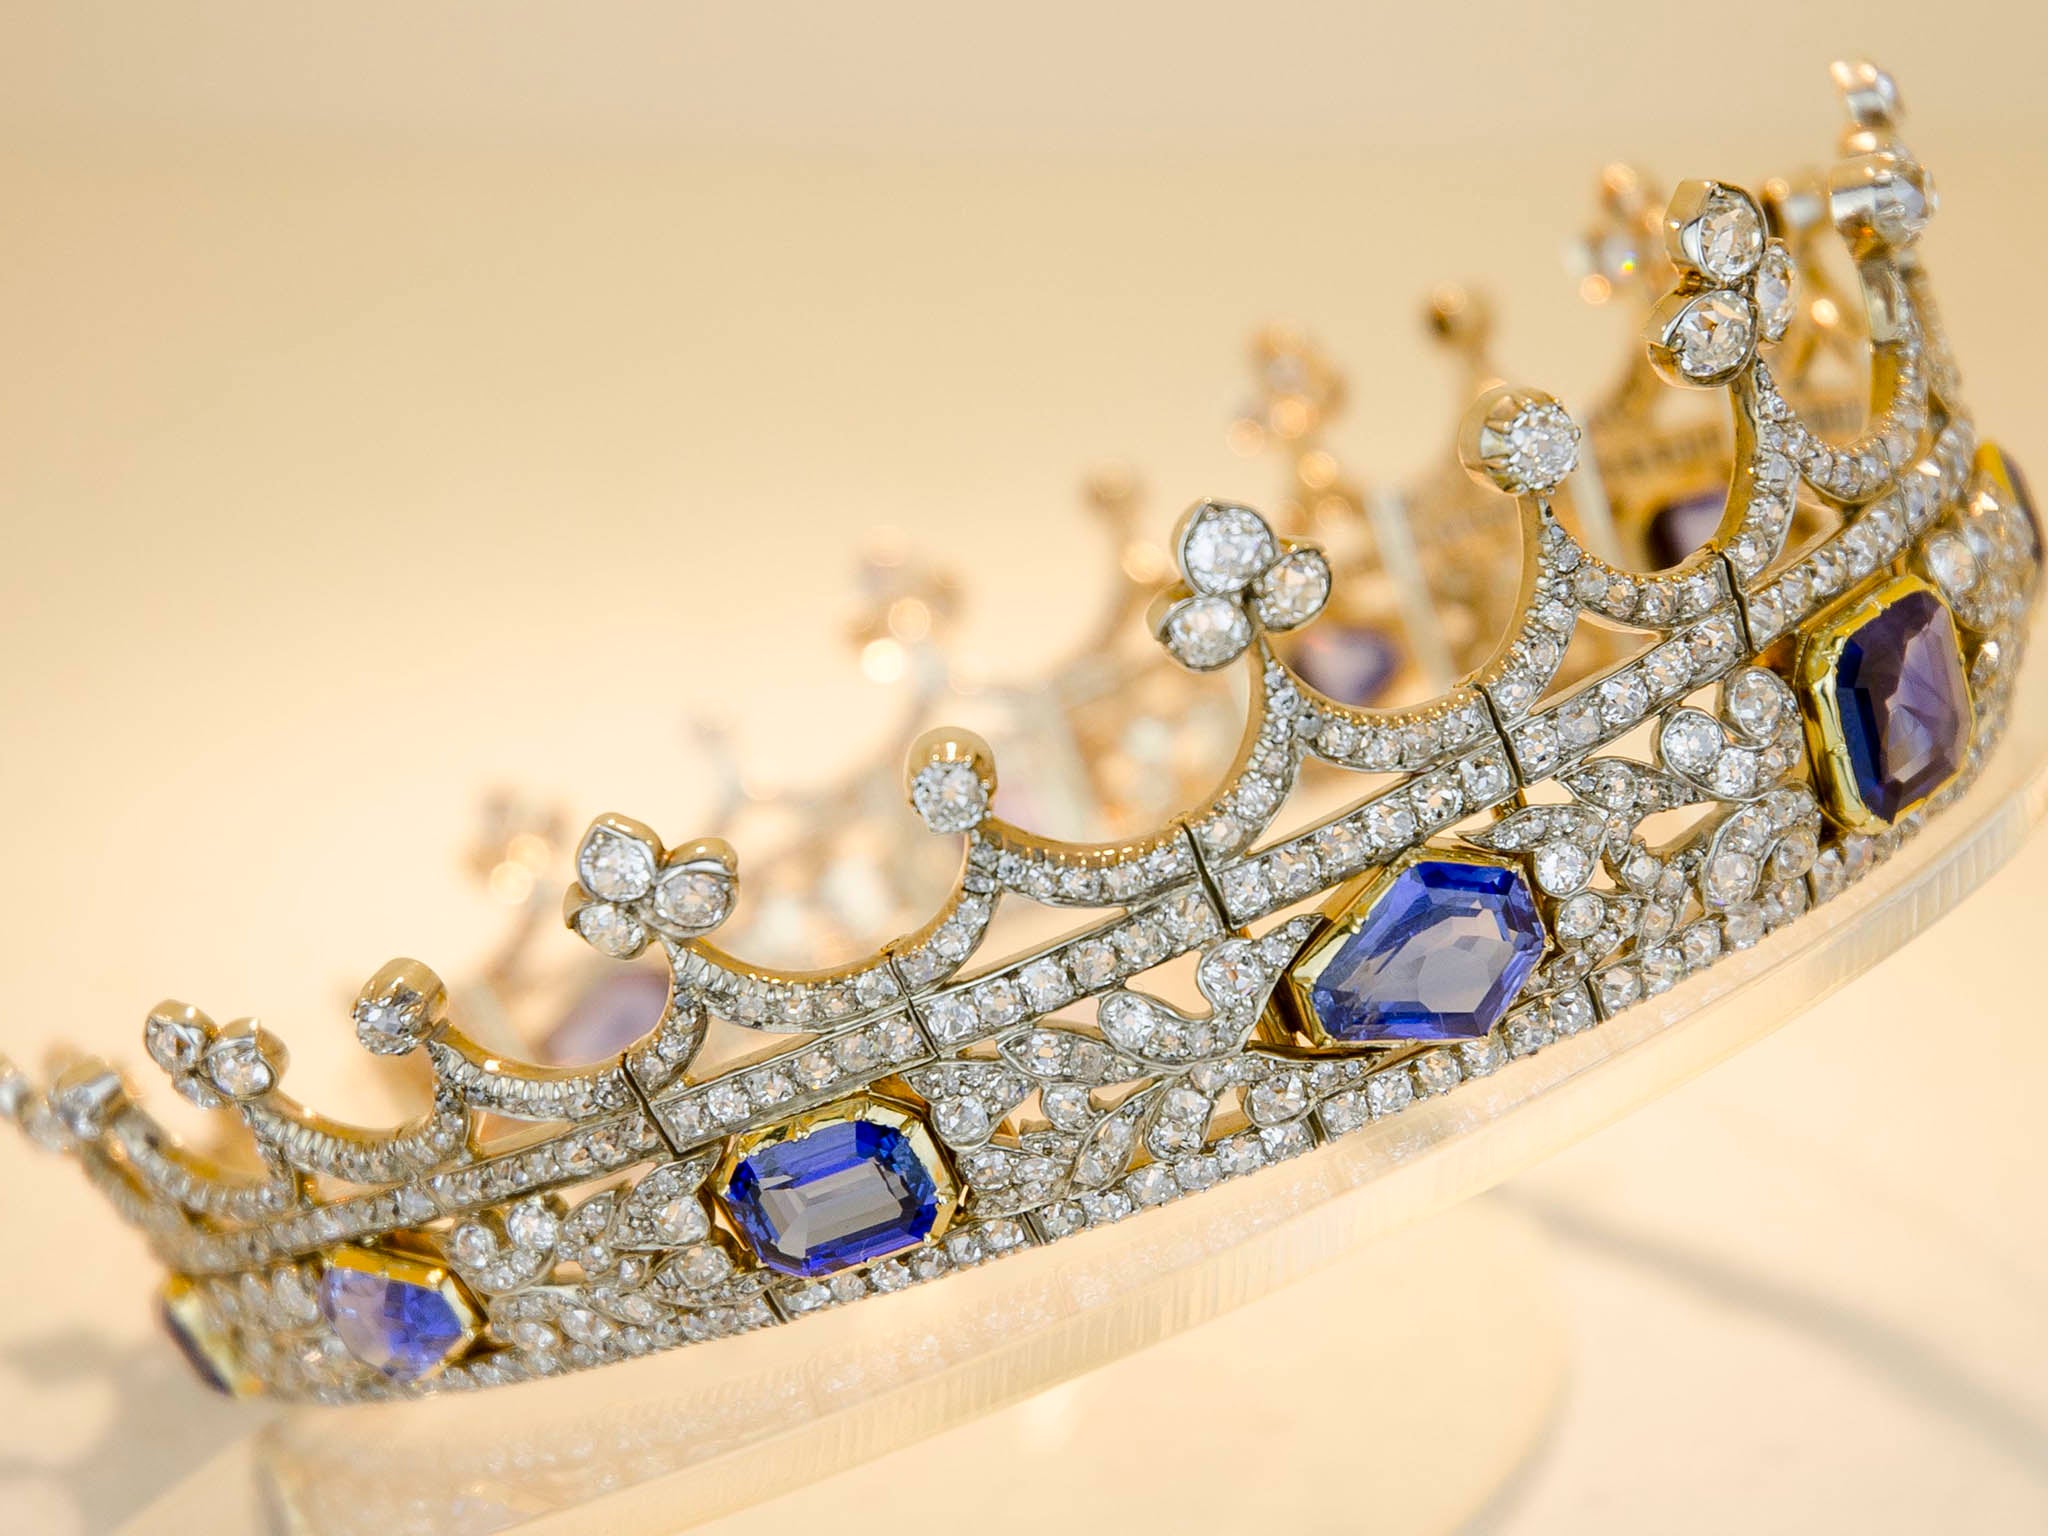 Prince Albert designed the coronet in 1840; it was made two years later at a cost of £415